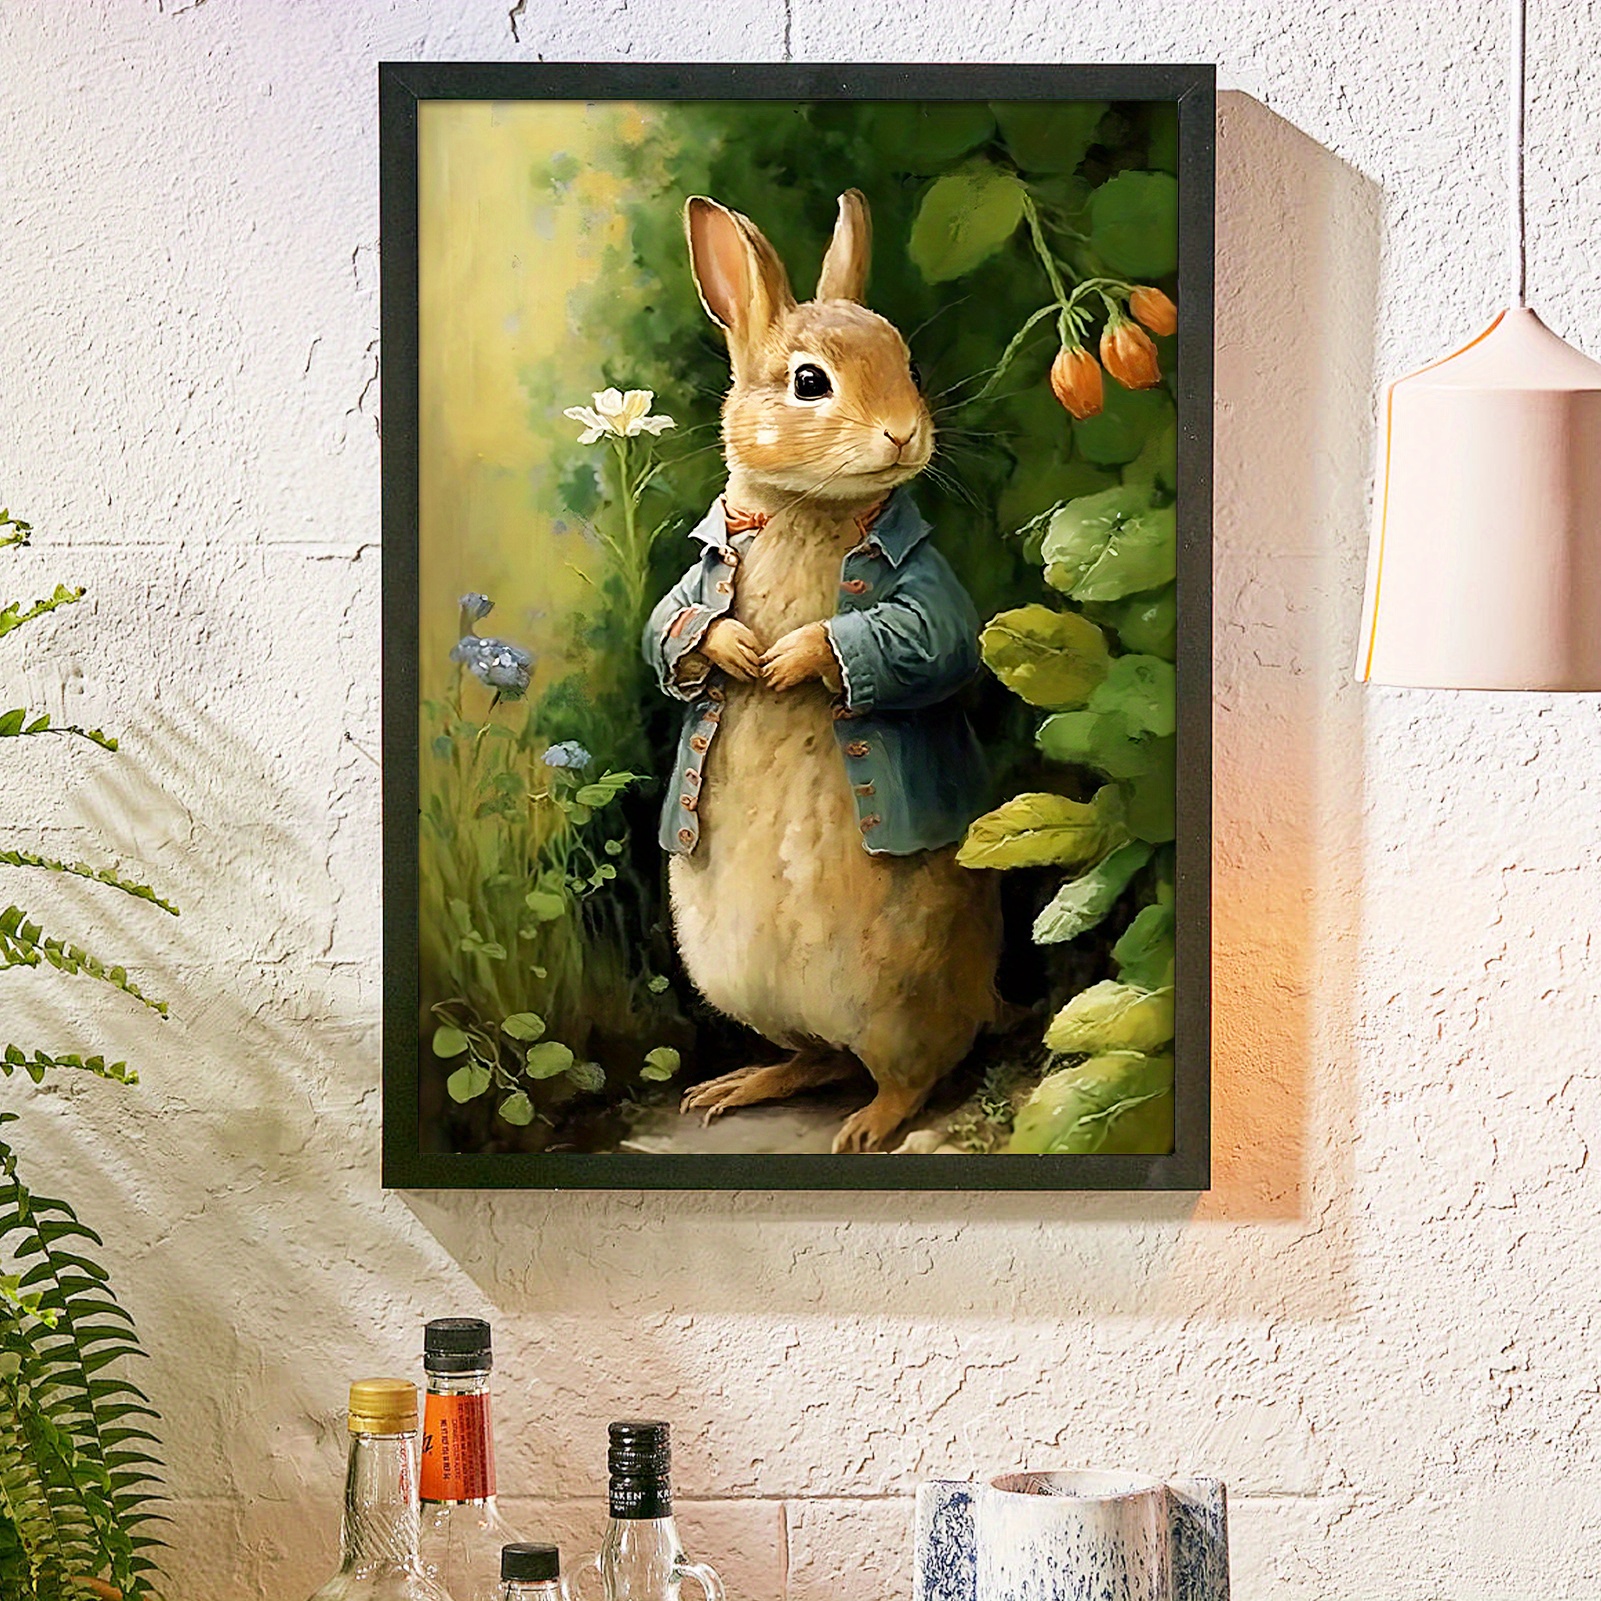 

5d Diy Large Diamond Art Painting Kits For Adult, 12x16inches/30x40cm Rabbit Round Full Diamond Diamond Art Kits Picture By Number Kits For Home Wall Decor Gifts Mother's Day, Easter Day